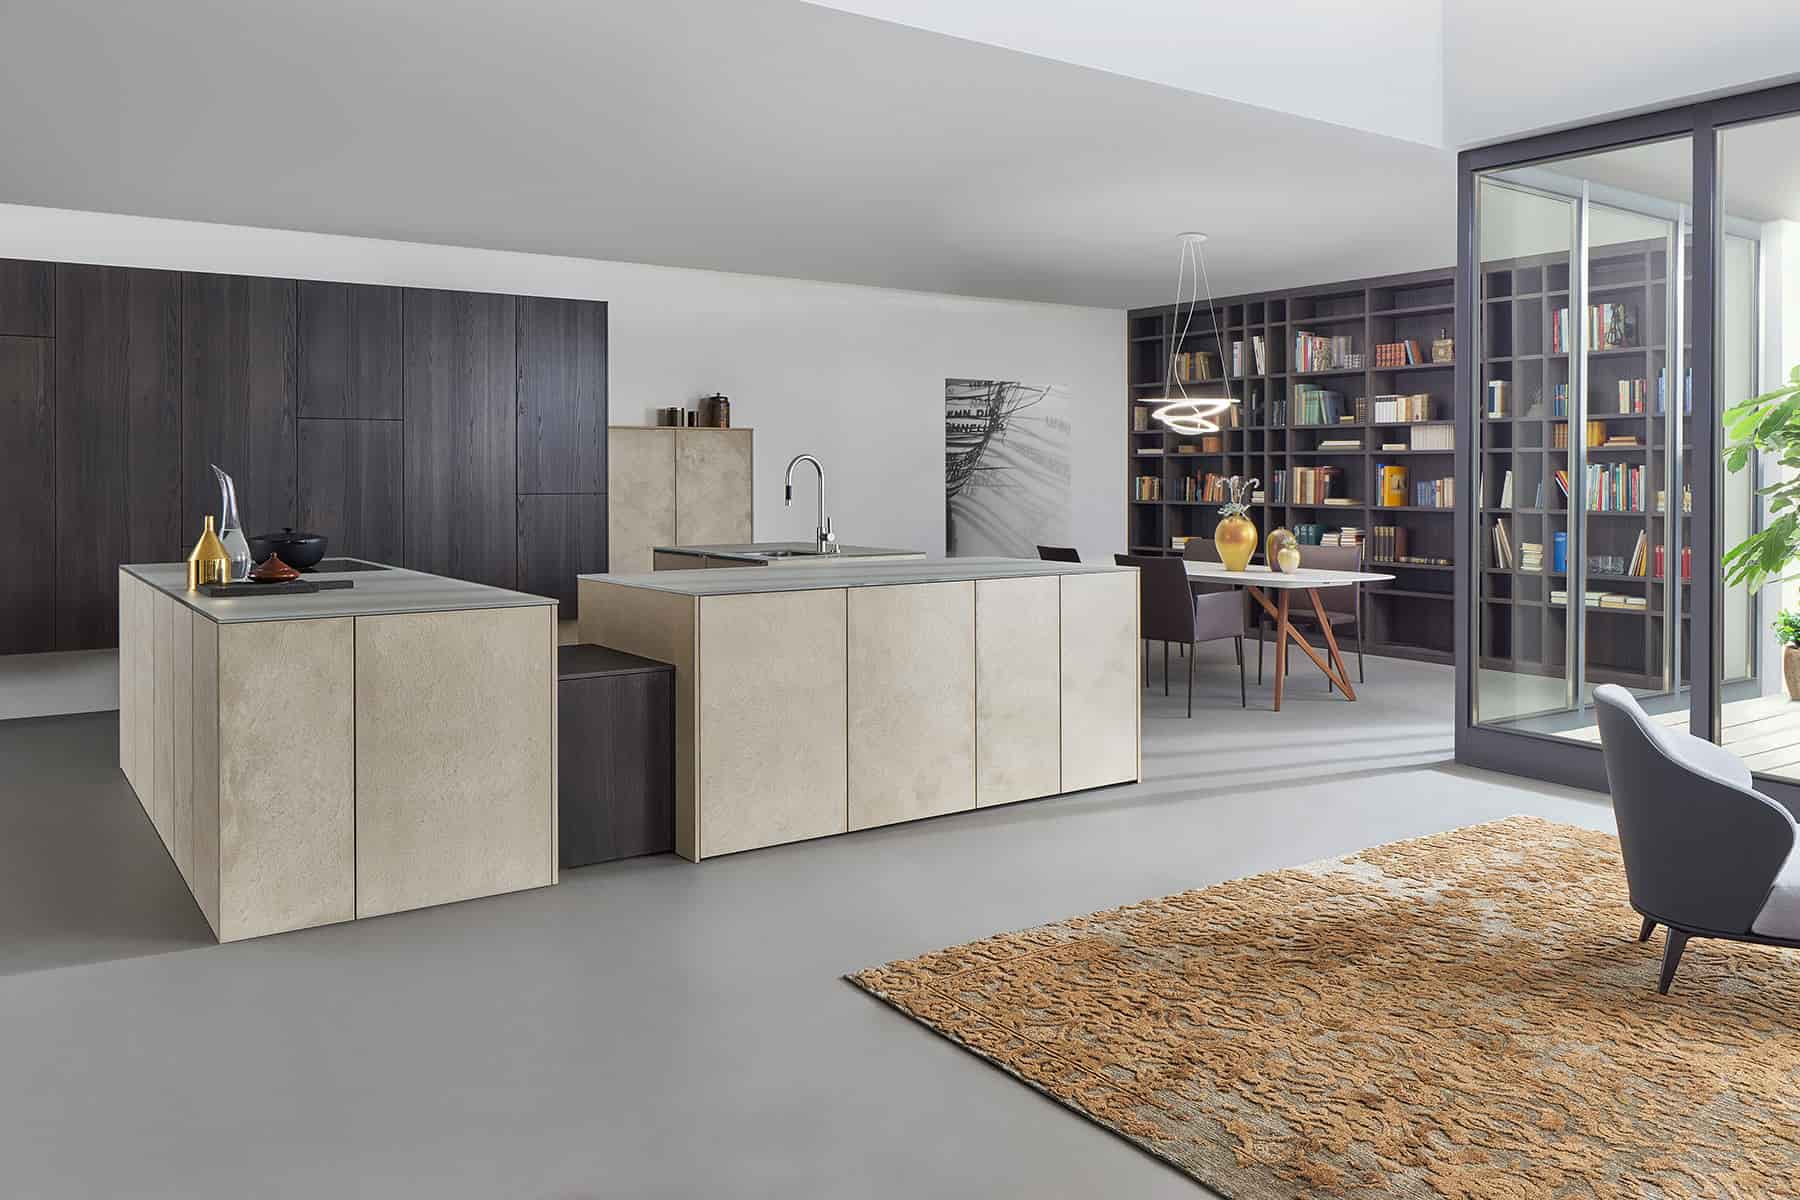 Image of kitchen cabinets area with beautiful interior